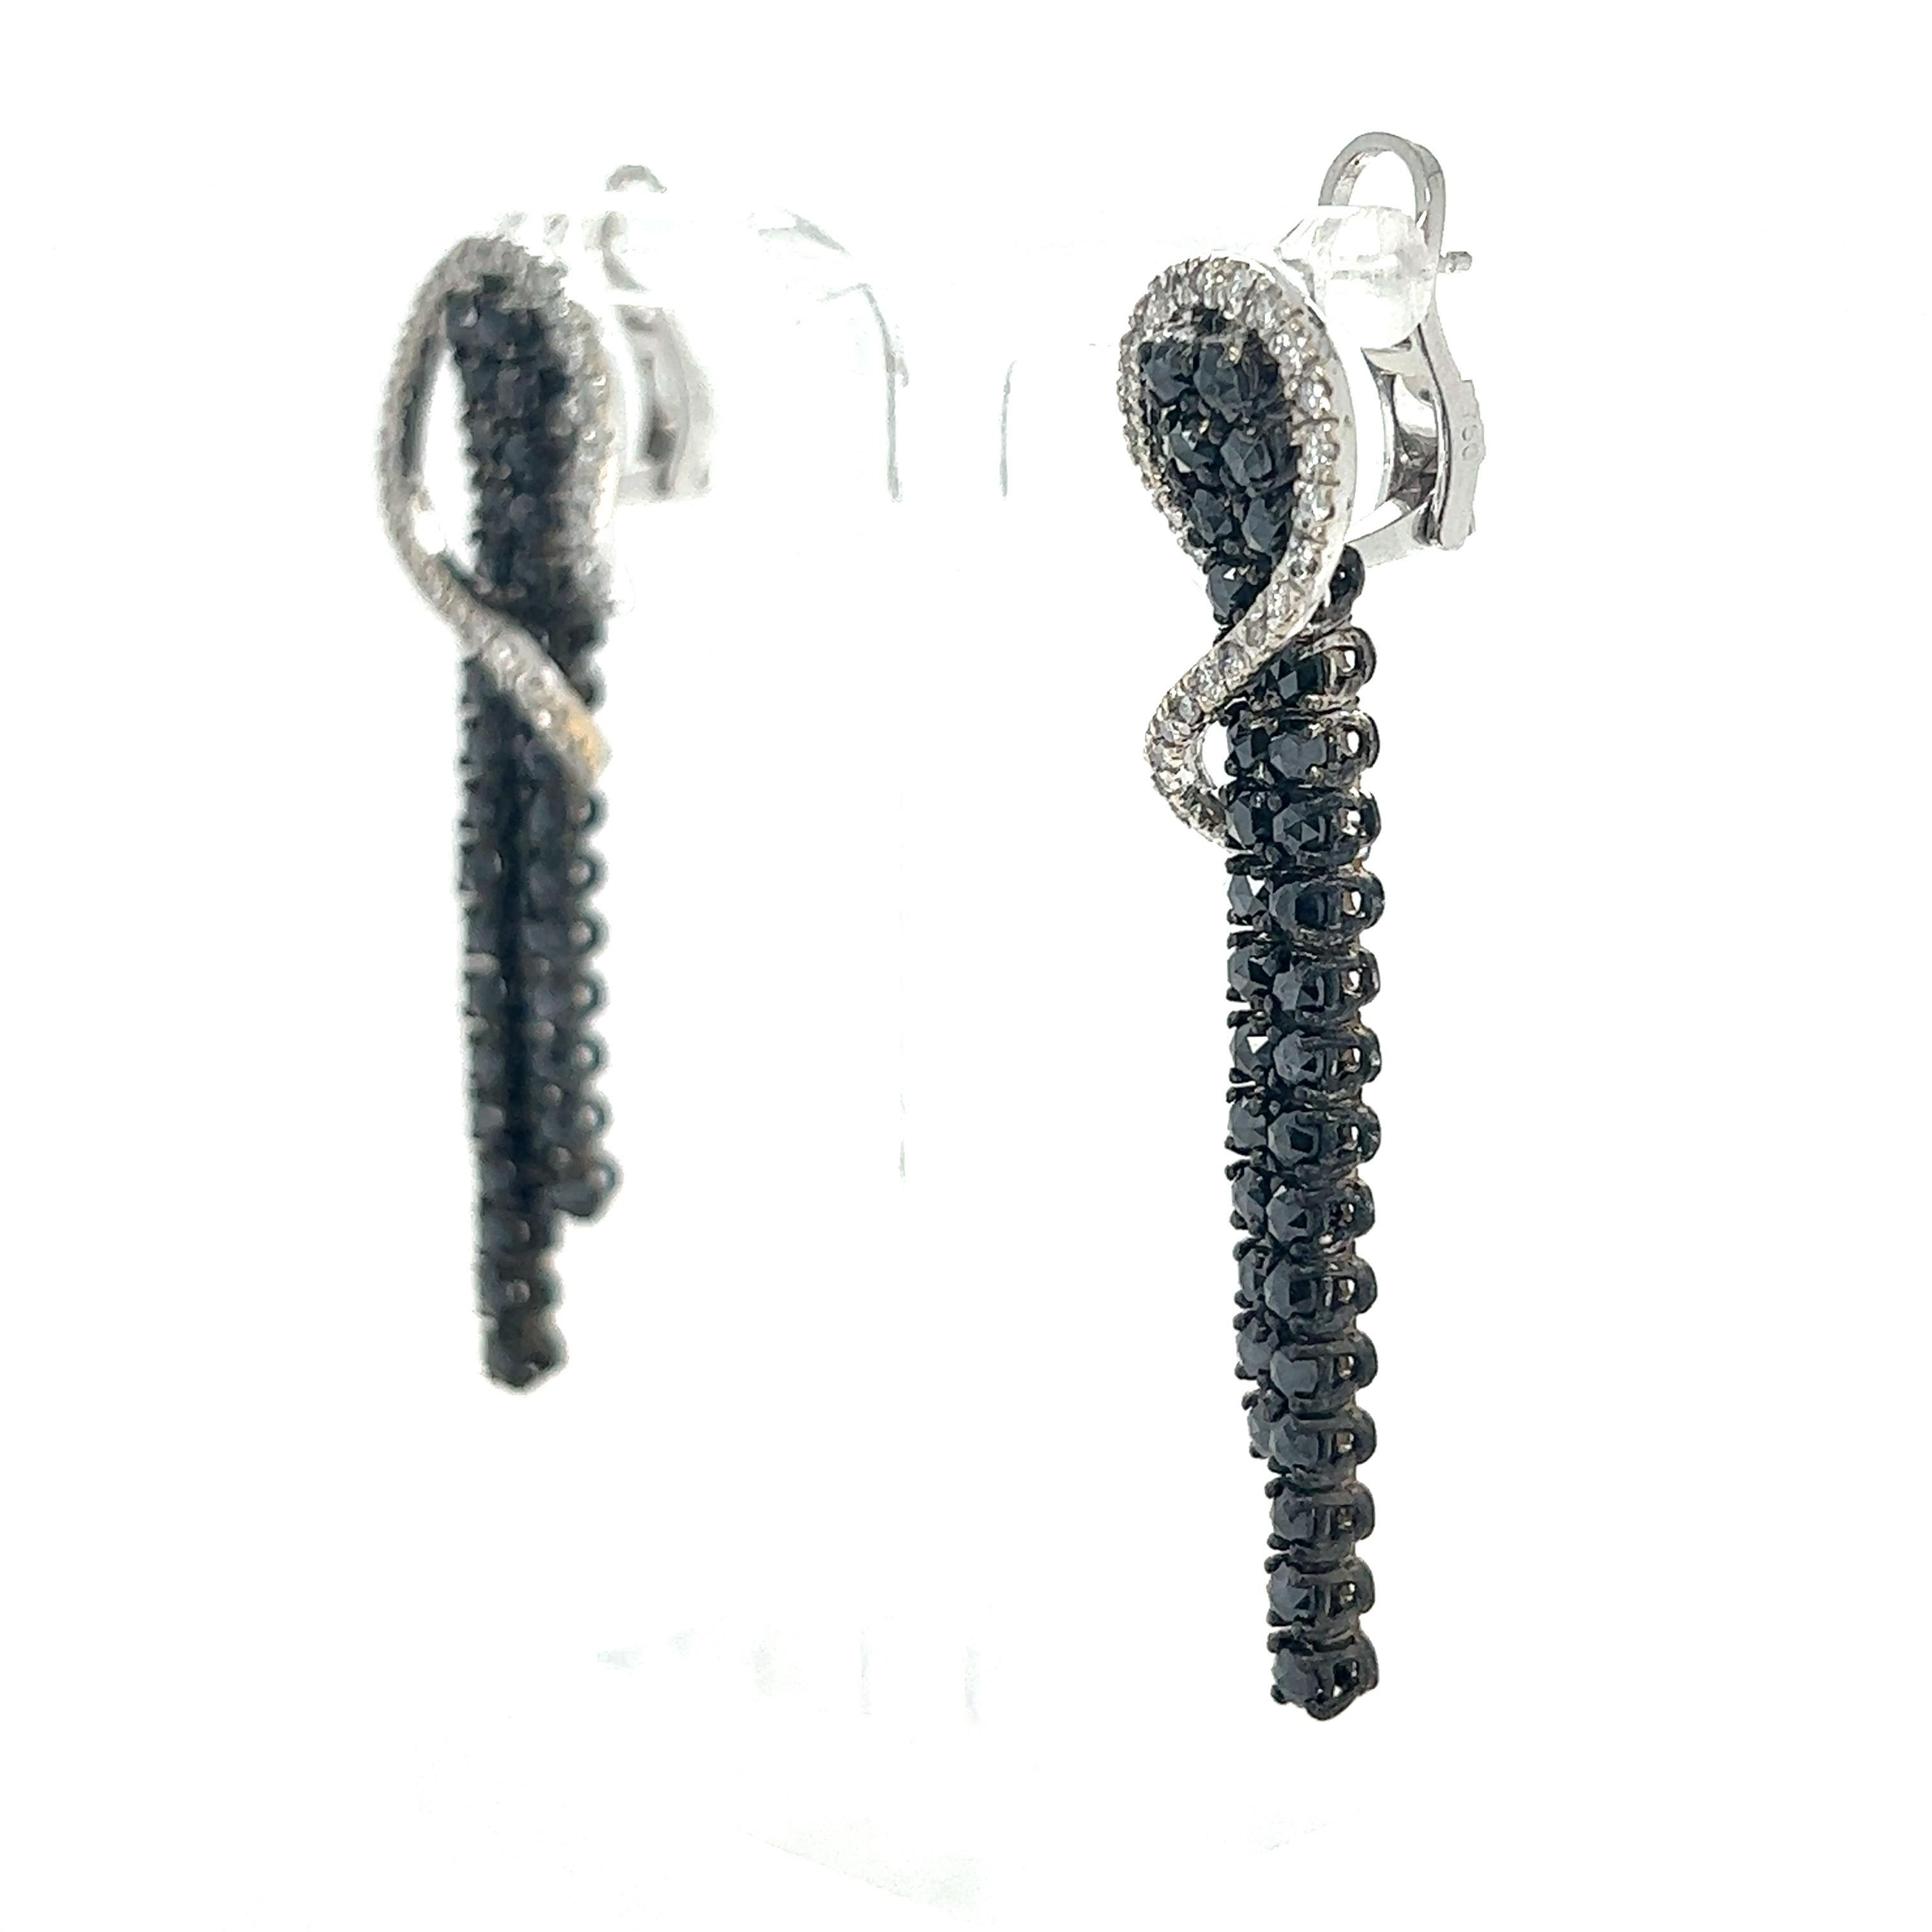 These gorgeous earrings have Natural Black Rose Cut Diamonds that weigh 4.42 Carats and Natural White Round Cut Diamonds that weigh 0.79 Carats. The total carat weight of the earrings are 5.21 Carats.  The clarity and color of the white diamonds are